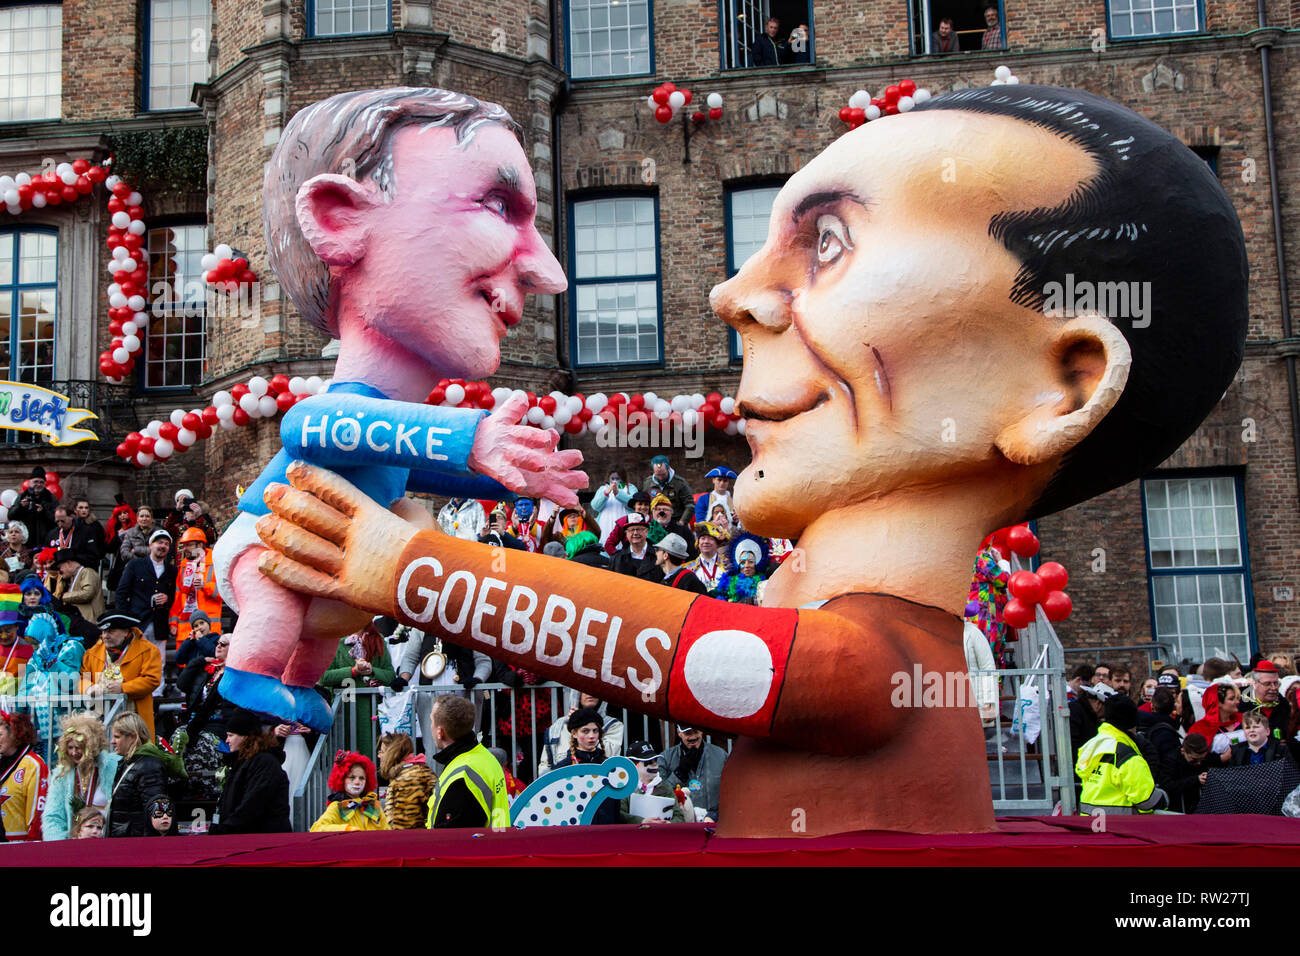 Düsseldorf, Germany. 4th March 2019. The annual Rosenmontag (Rose Monday or Shrove Monday) carnival parade takes place in Düsseldorf. Carnival float designed by Jacques Tilly depicting right-wing politican Björn Höcke as son of Josef Goebbels.. Photo: Vibrant Pictures/Alamy Live News Stock Photo